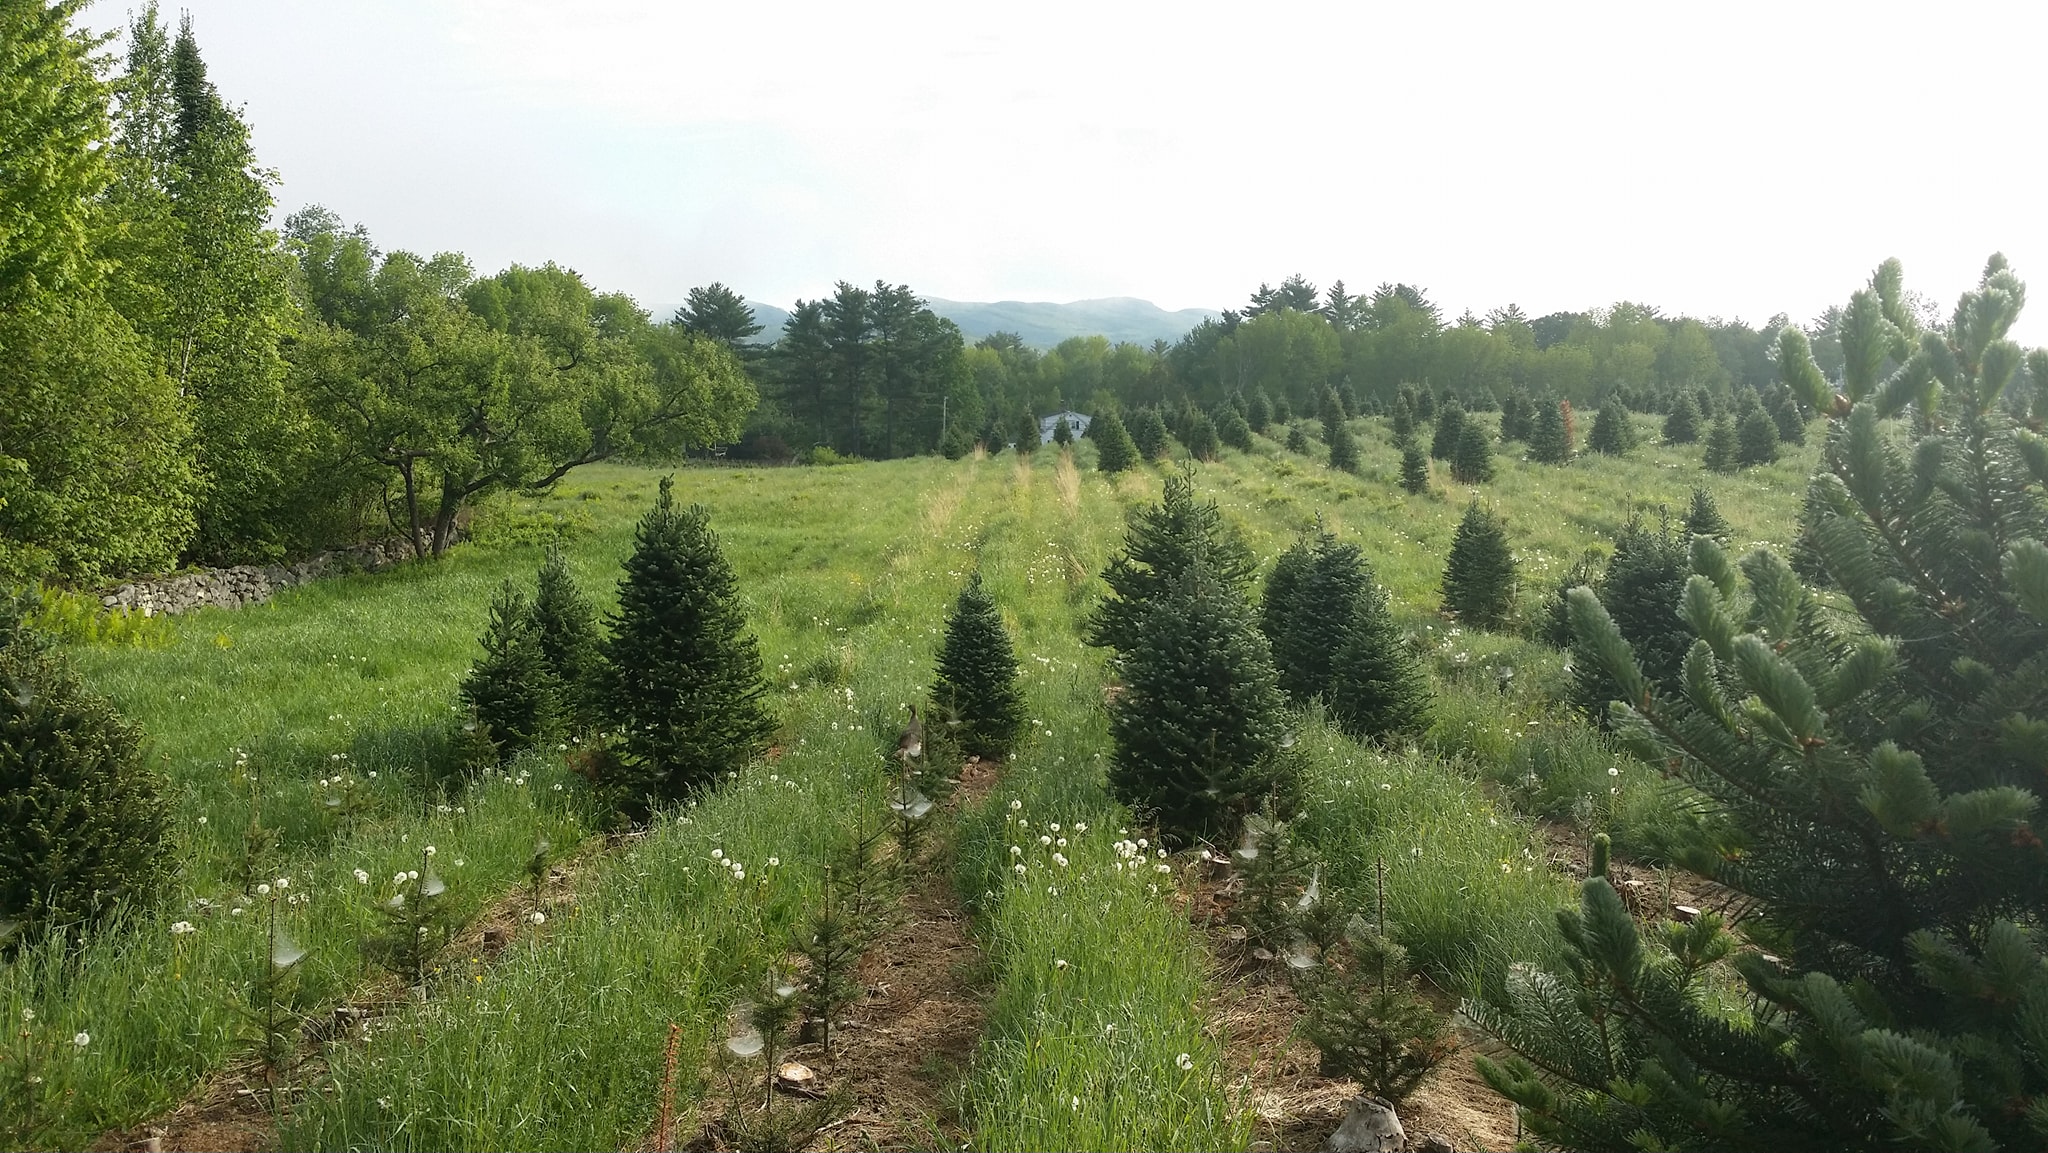 Rows of Christmas trees in a green field with a few tiny saplings among them.